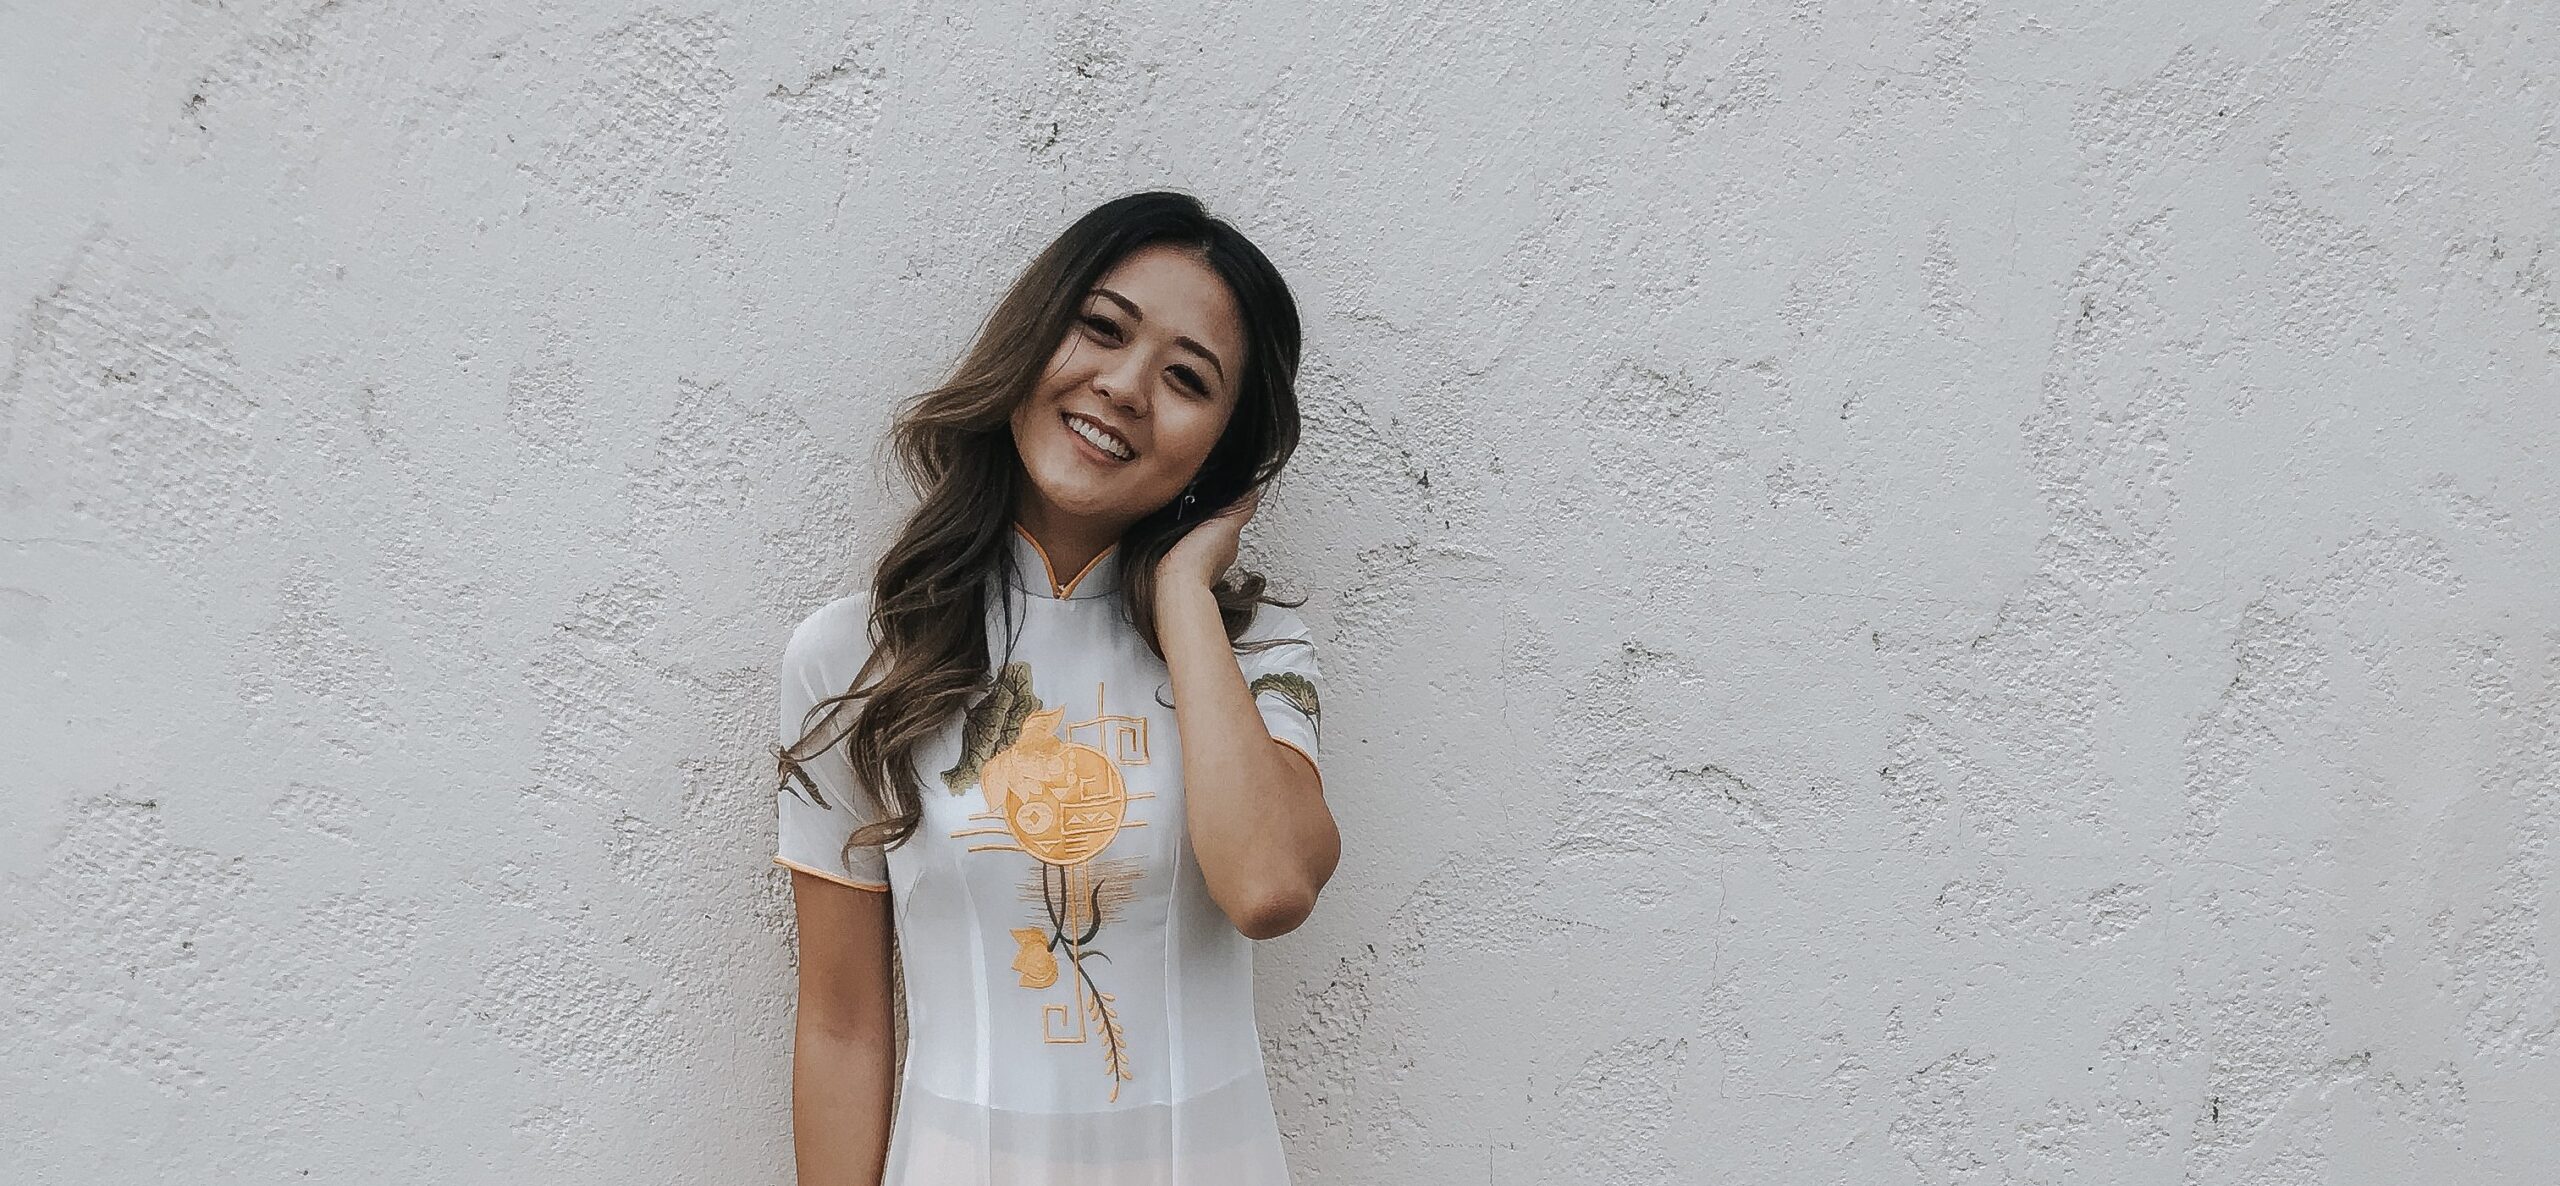 Lifestyle blogger Demi Bang talks about her favorite Lunar New Year Traditions growing up as an Asian American first generation.